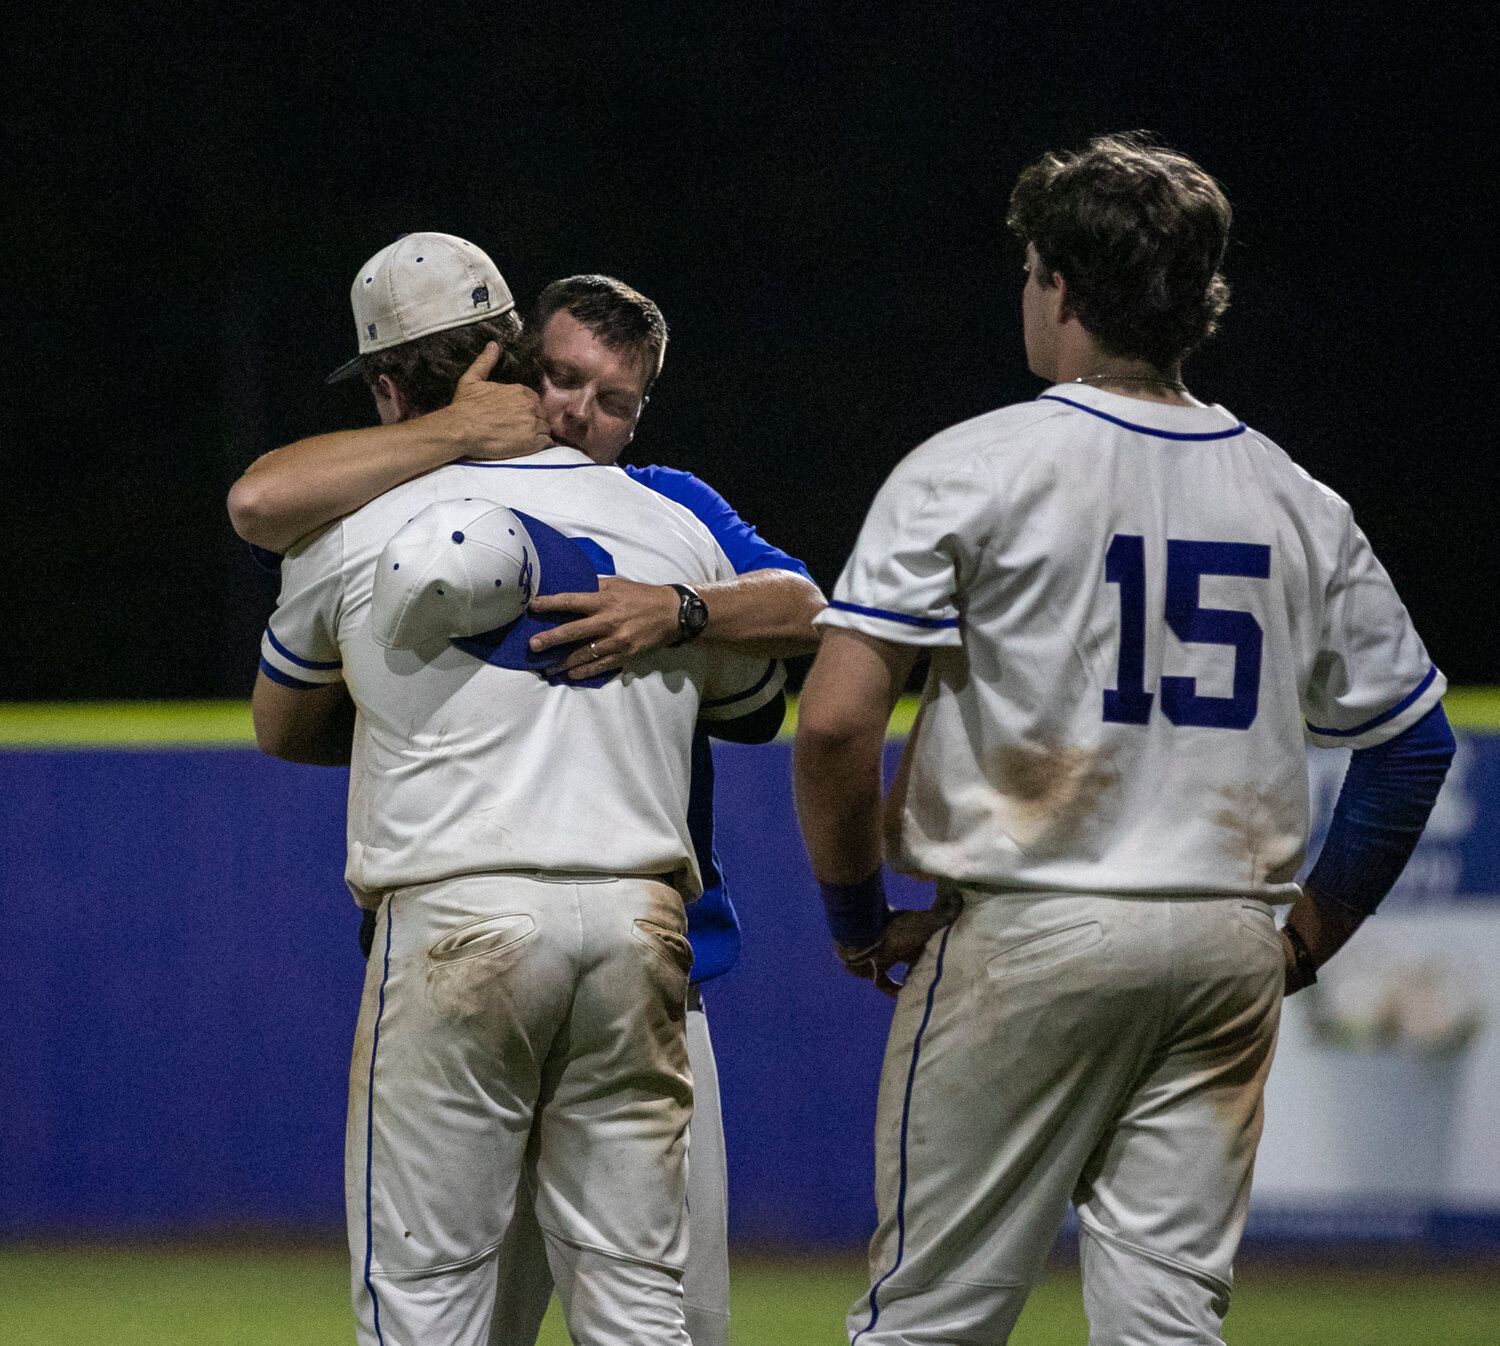 Pirate skipper Kyle Hunter embraces Jackson Hatcher after Fairhope’s season came to an end in the first round of the state playoffs against Smiths Station at home Friday, April 28.